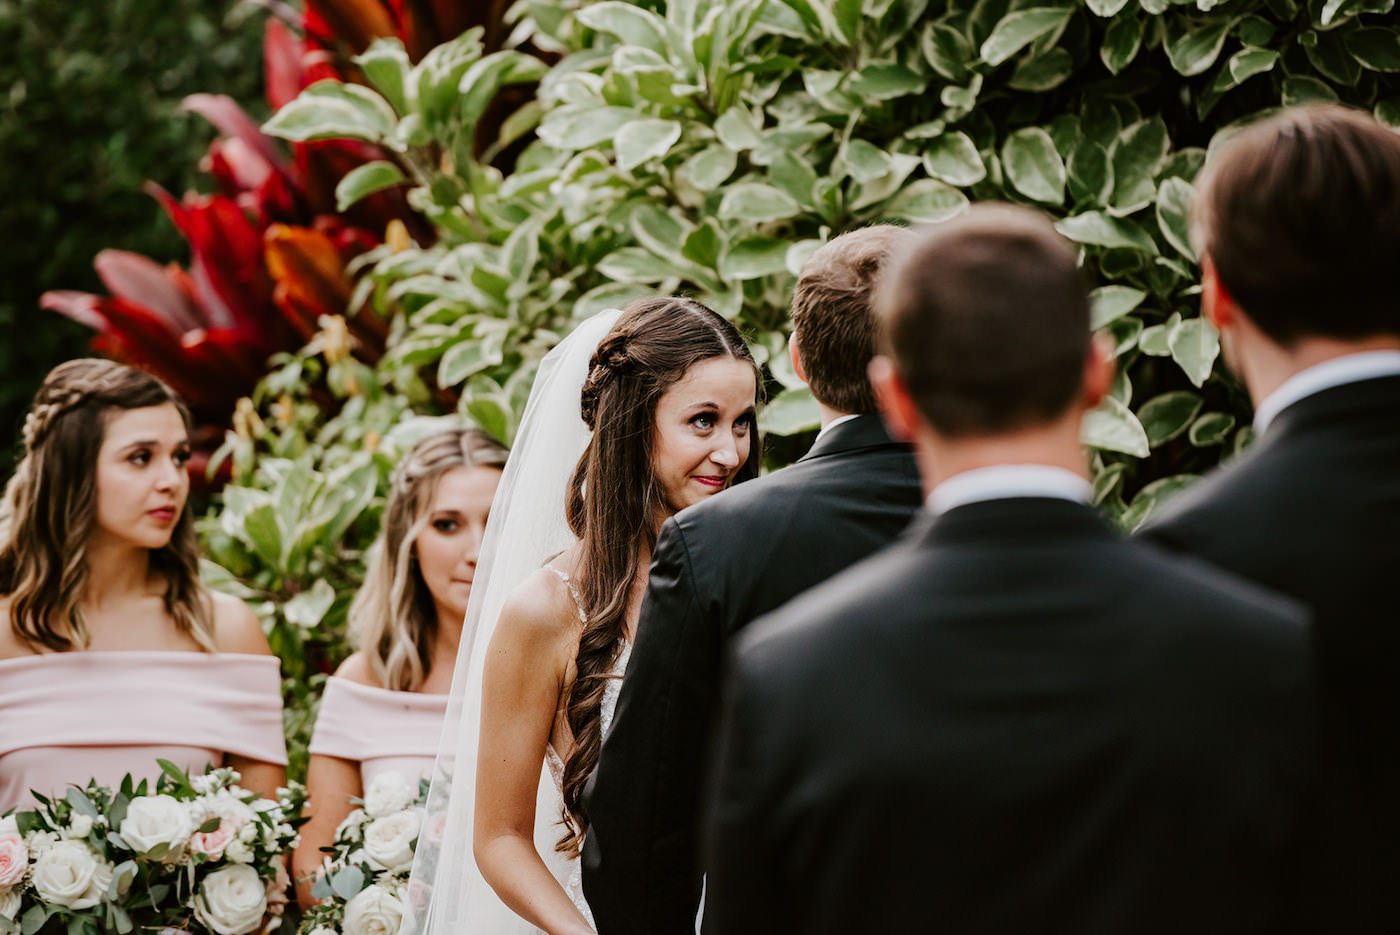 Bride and Groom Exchanging Vows during Outdoor Garden Ceremony at St. Pete Wedding